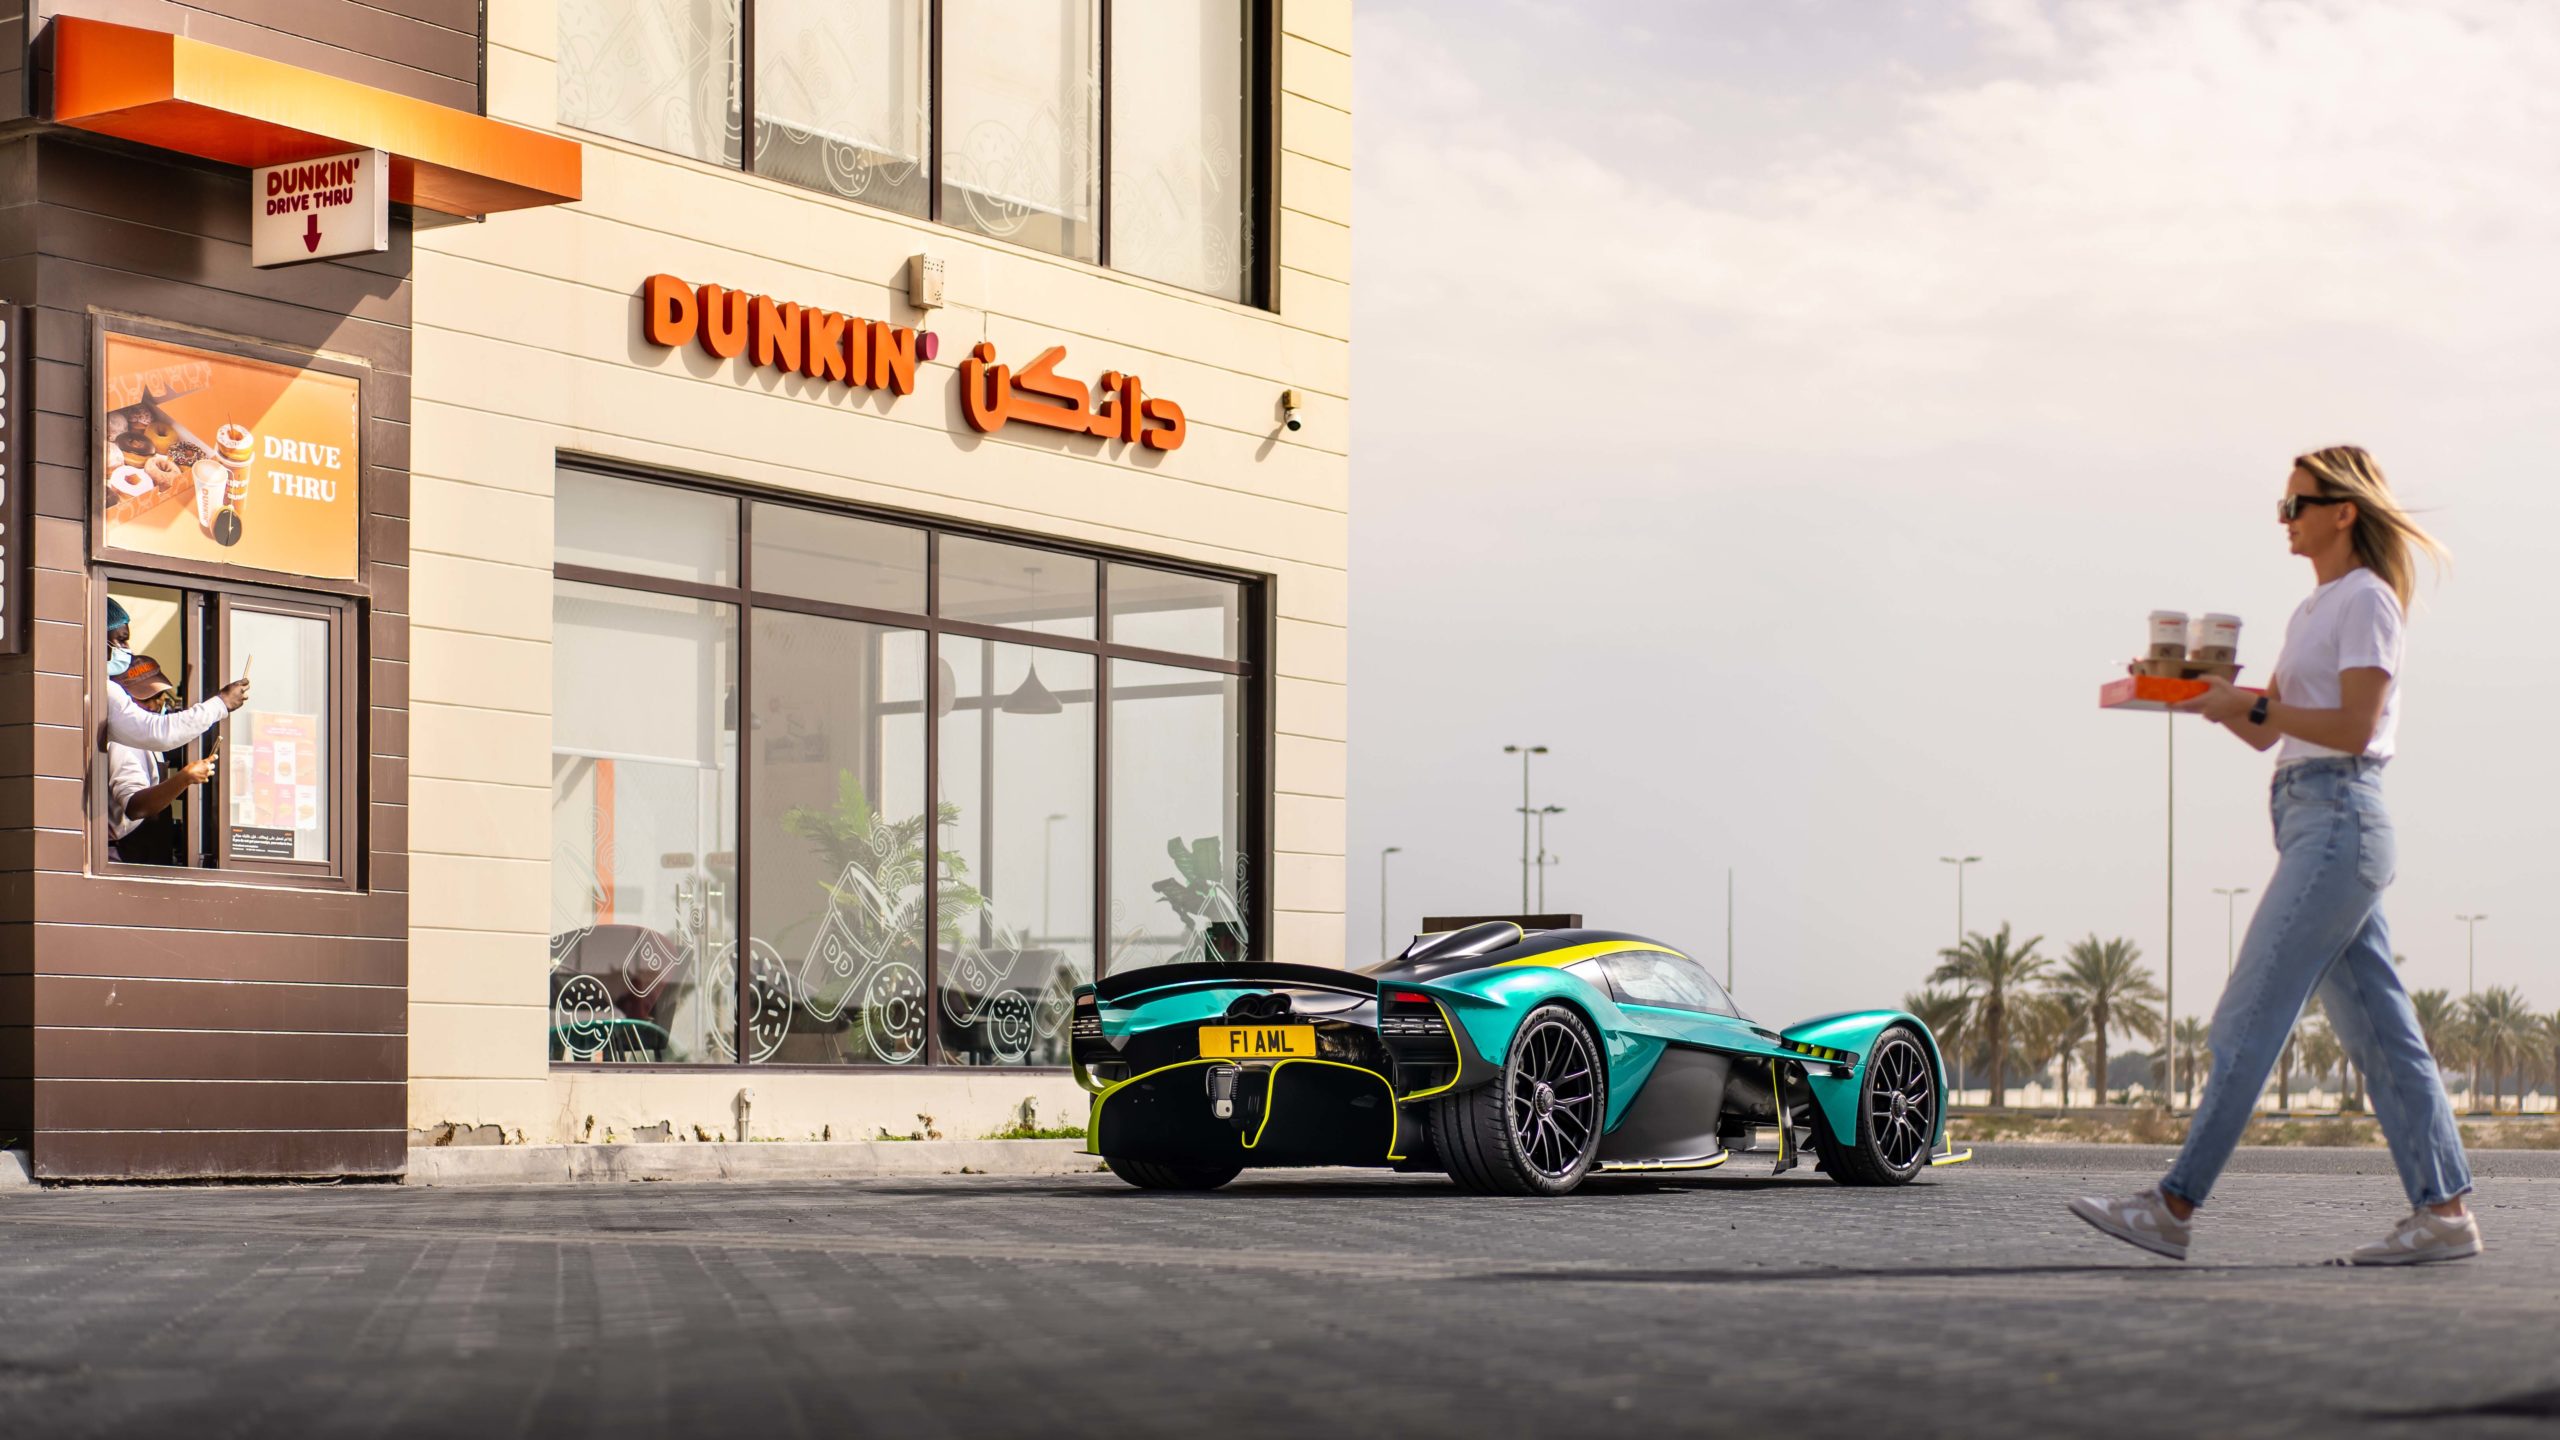 what's it like to drive the 1,139bhp aston martin valkyrie on the road?